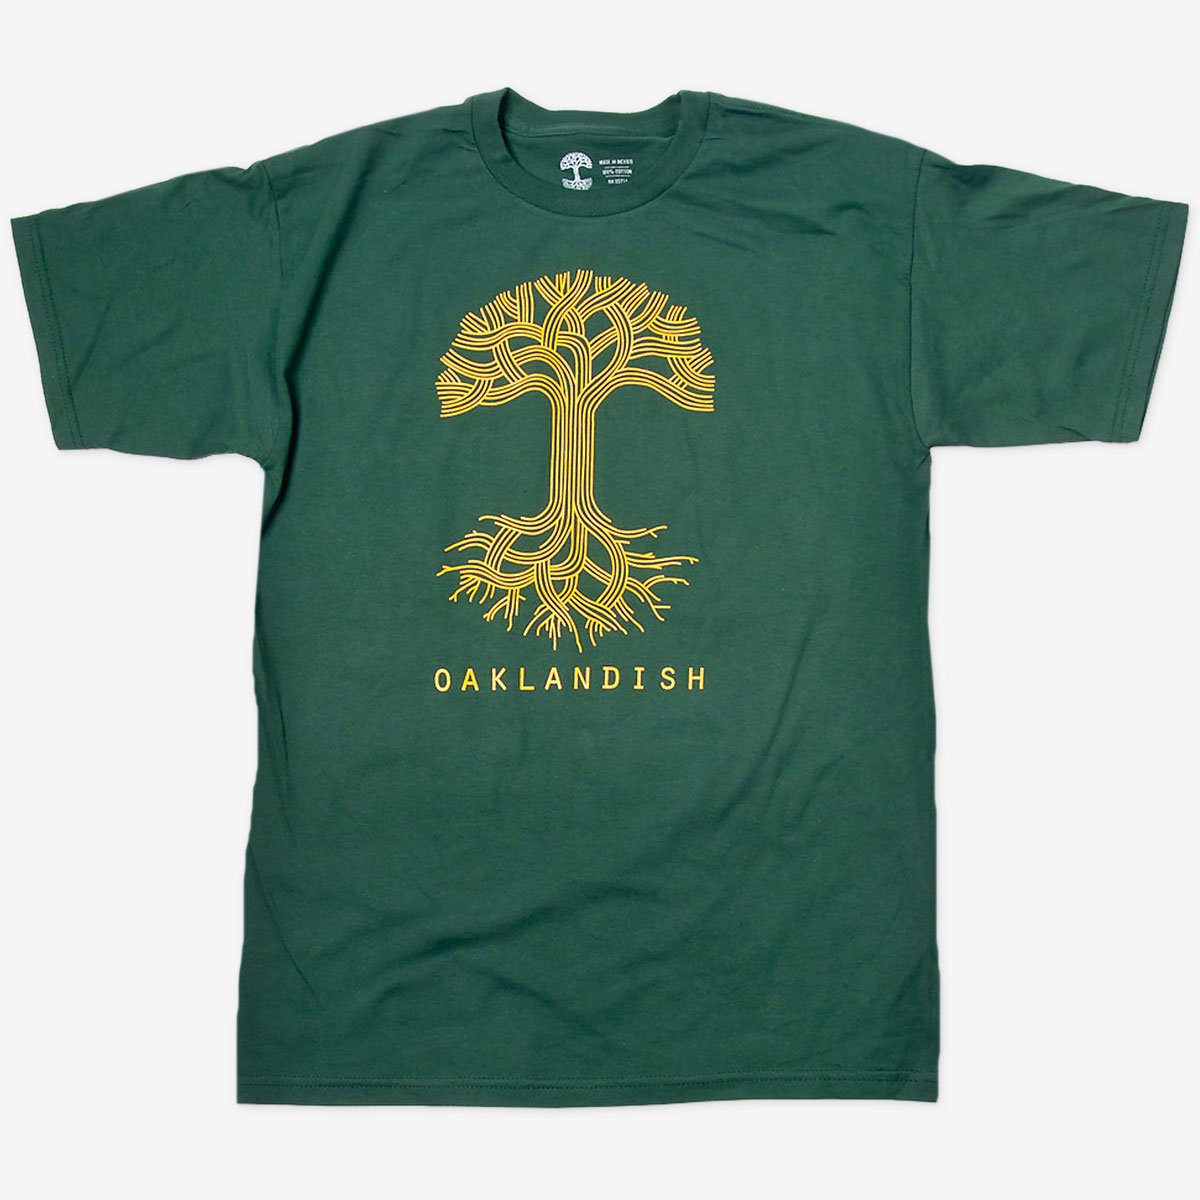 A forest green t-shirt with a large yellow Oaklandish tree logo on the chest.